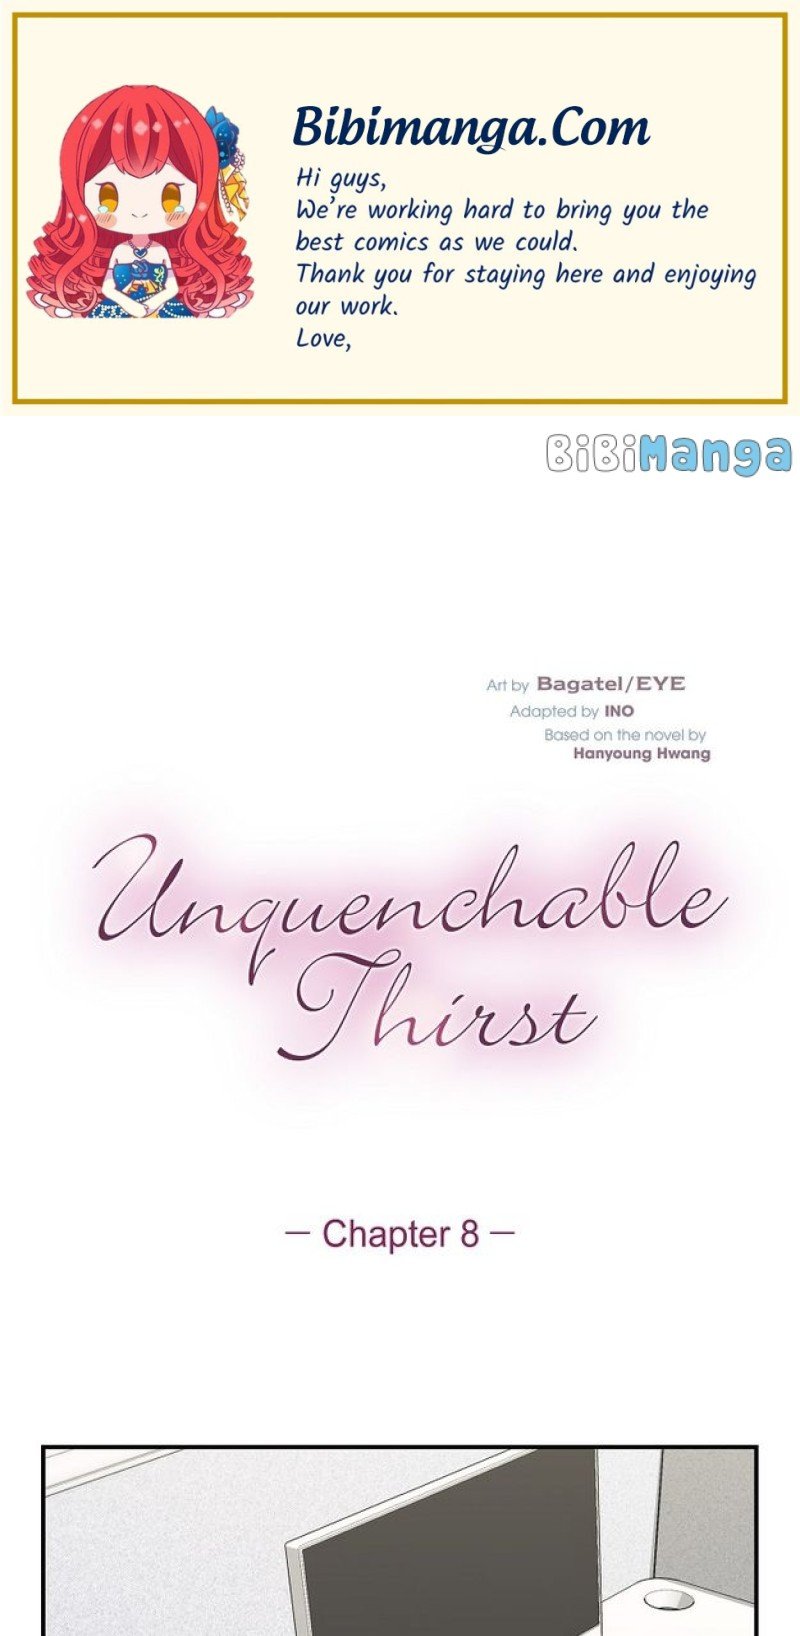 Unquenchable Thirst chapter 8